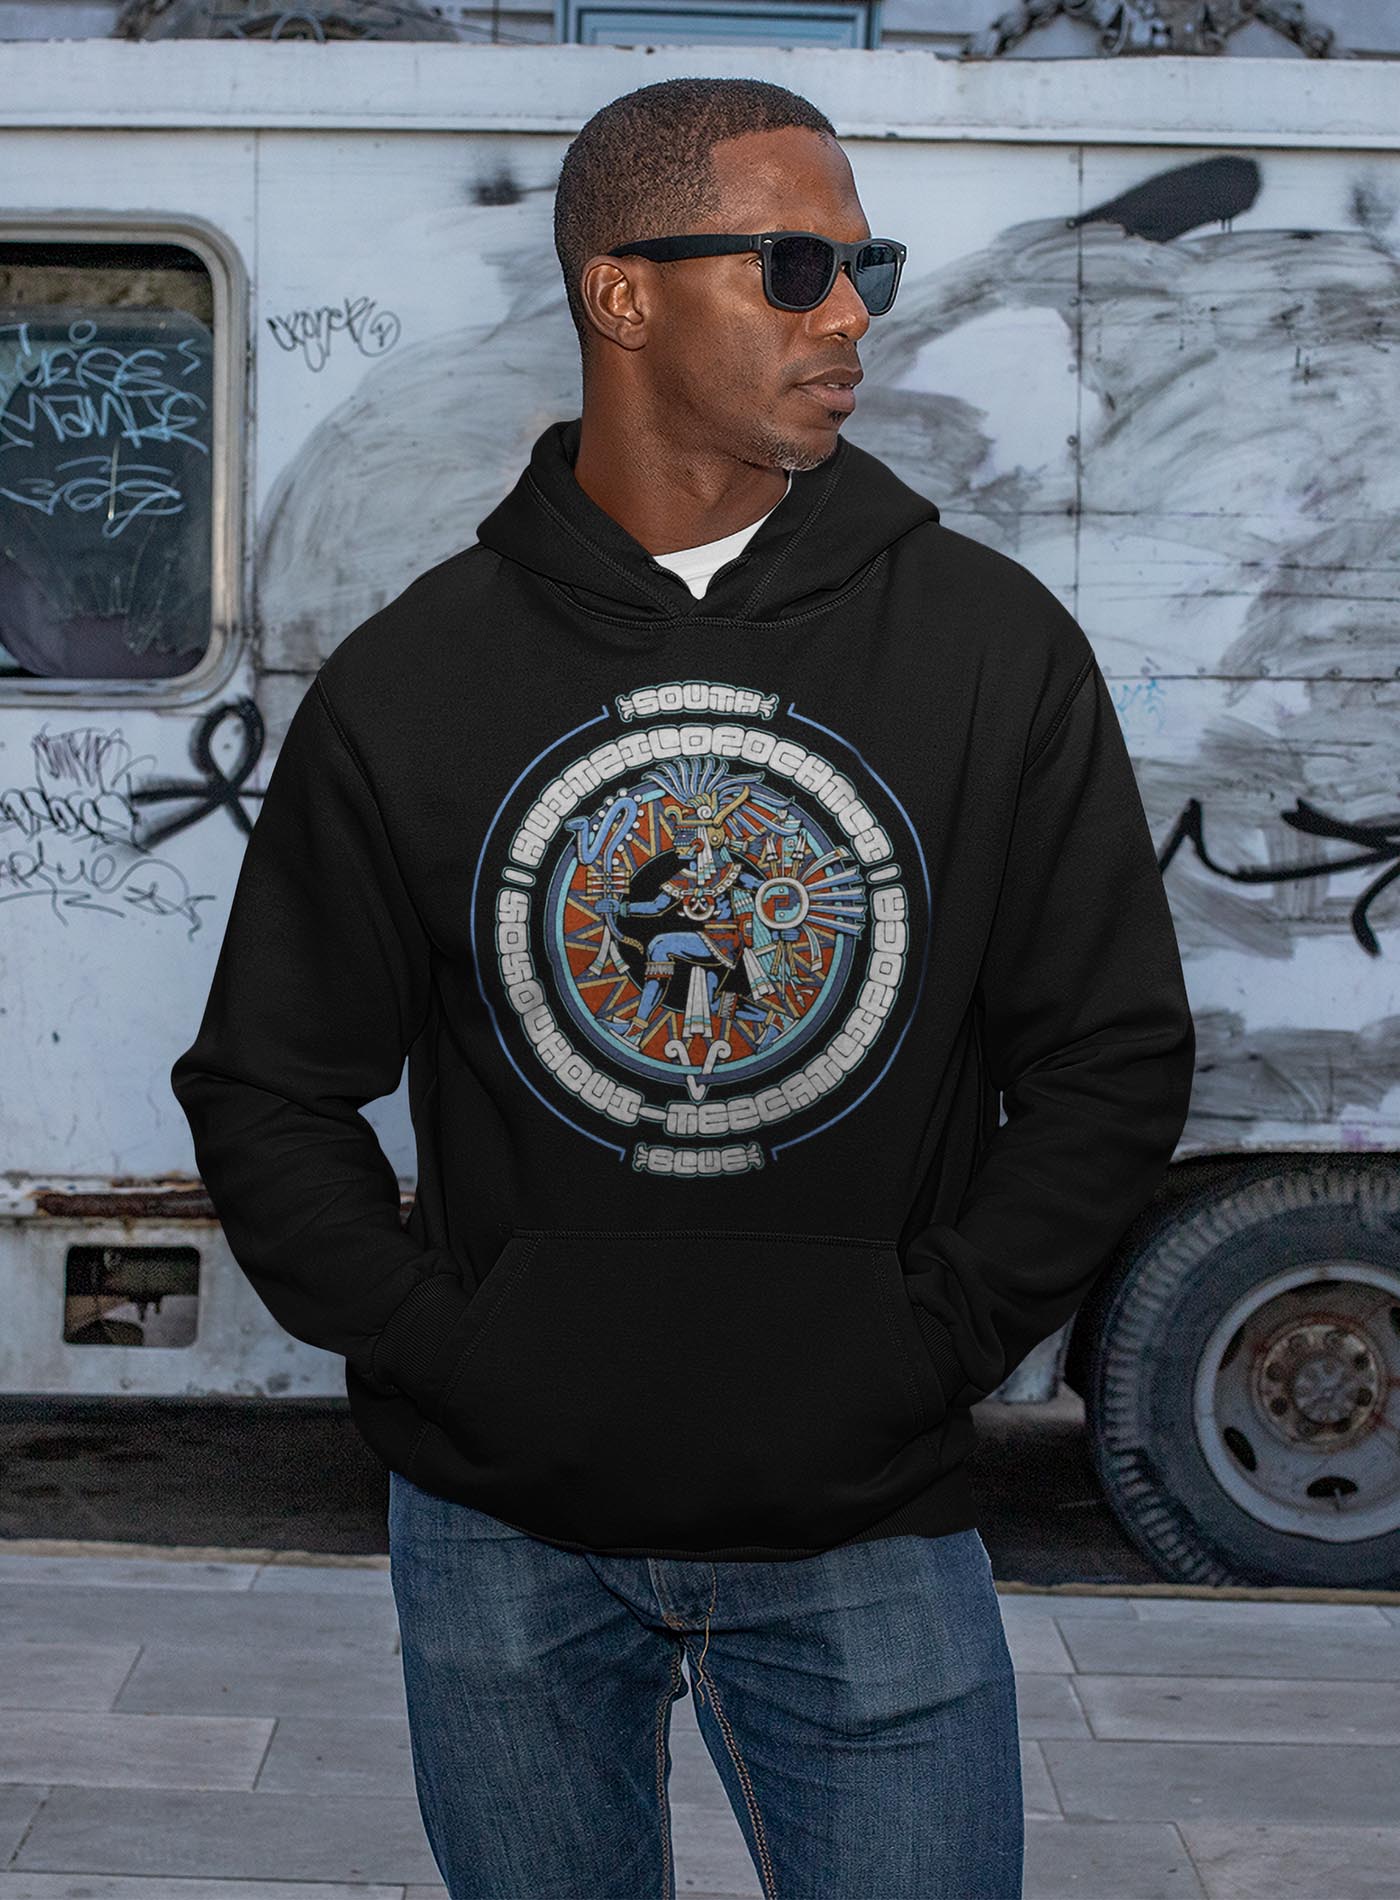 man modeling a black unisex hoodie featuring a front print of the toltec-aztec god Tezcatlipoca also known as Huitzilopochtli. Reinterpretation by Mexican illustrator G.M. Meave.